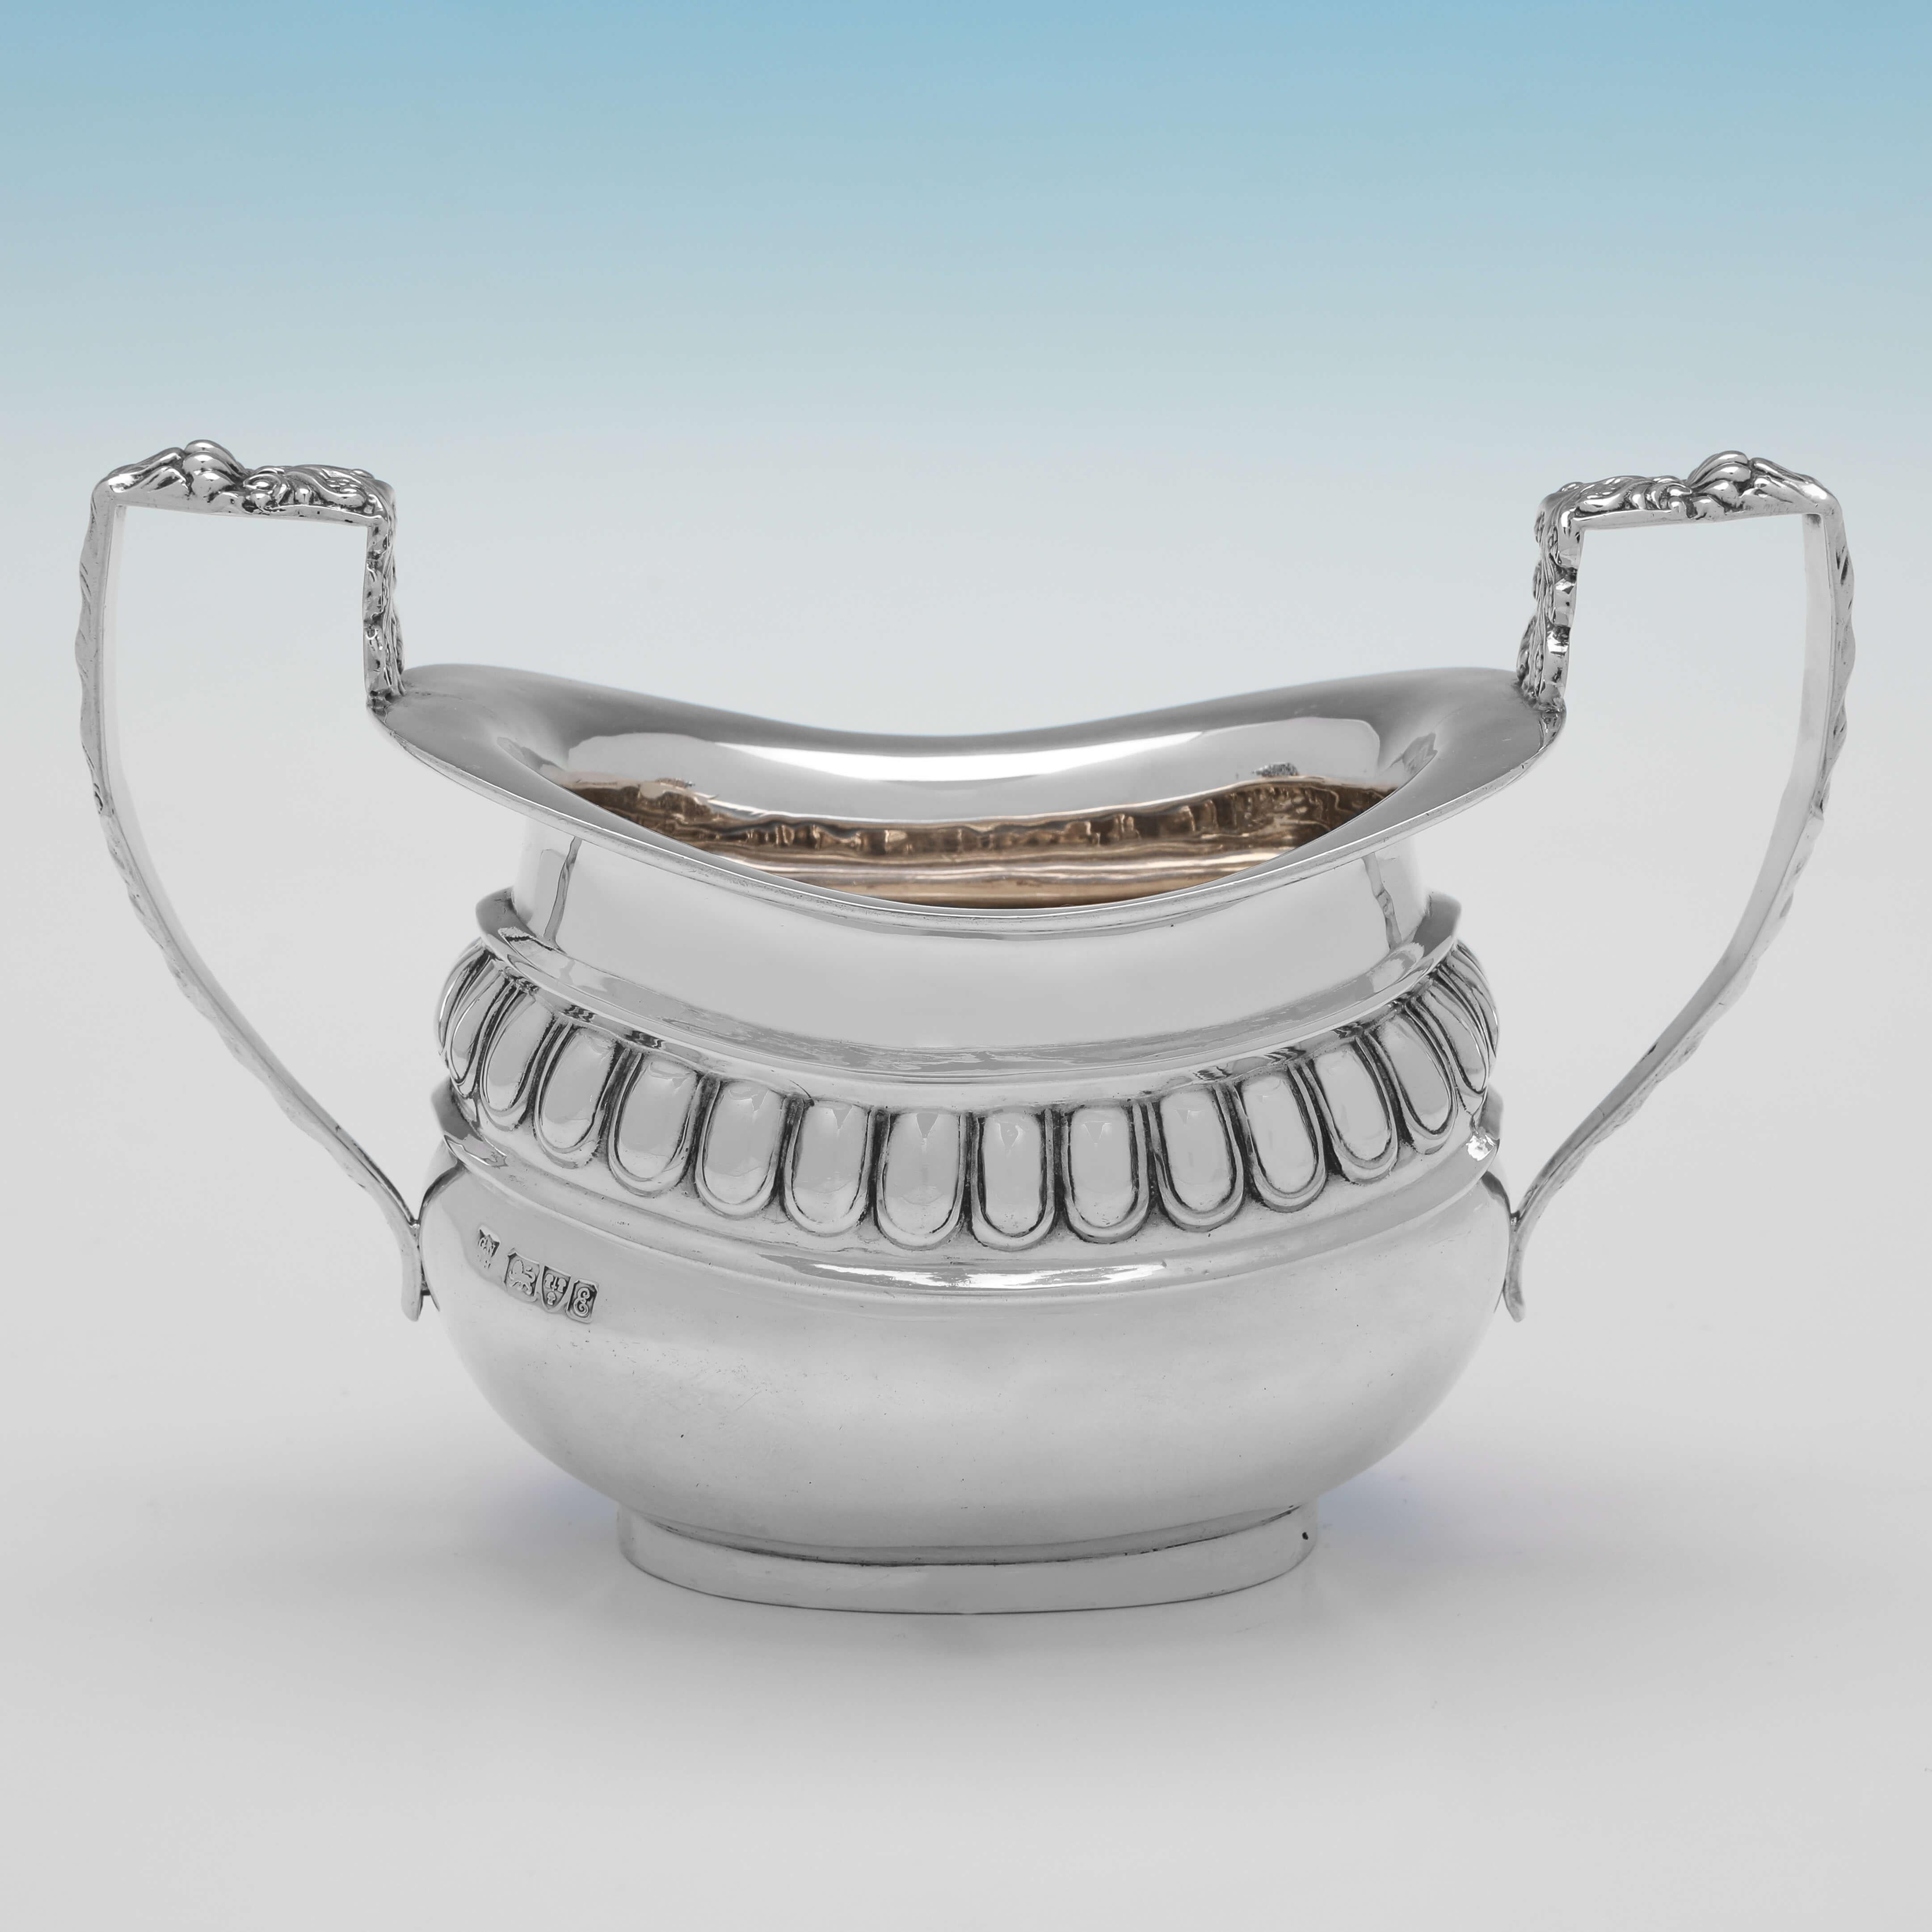 Hallmarked in Chester in 1905 by Nathan & Hayes, this charming, Antique Sterling Silver Sugar And Cream Set is comprised of a sugar bowl that measures 4